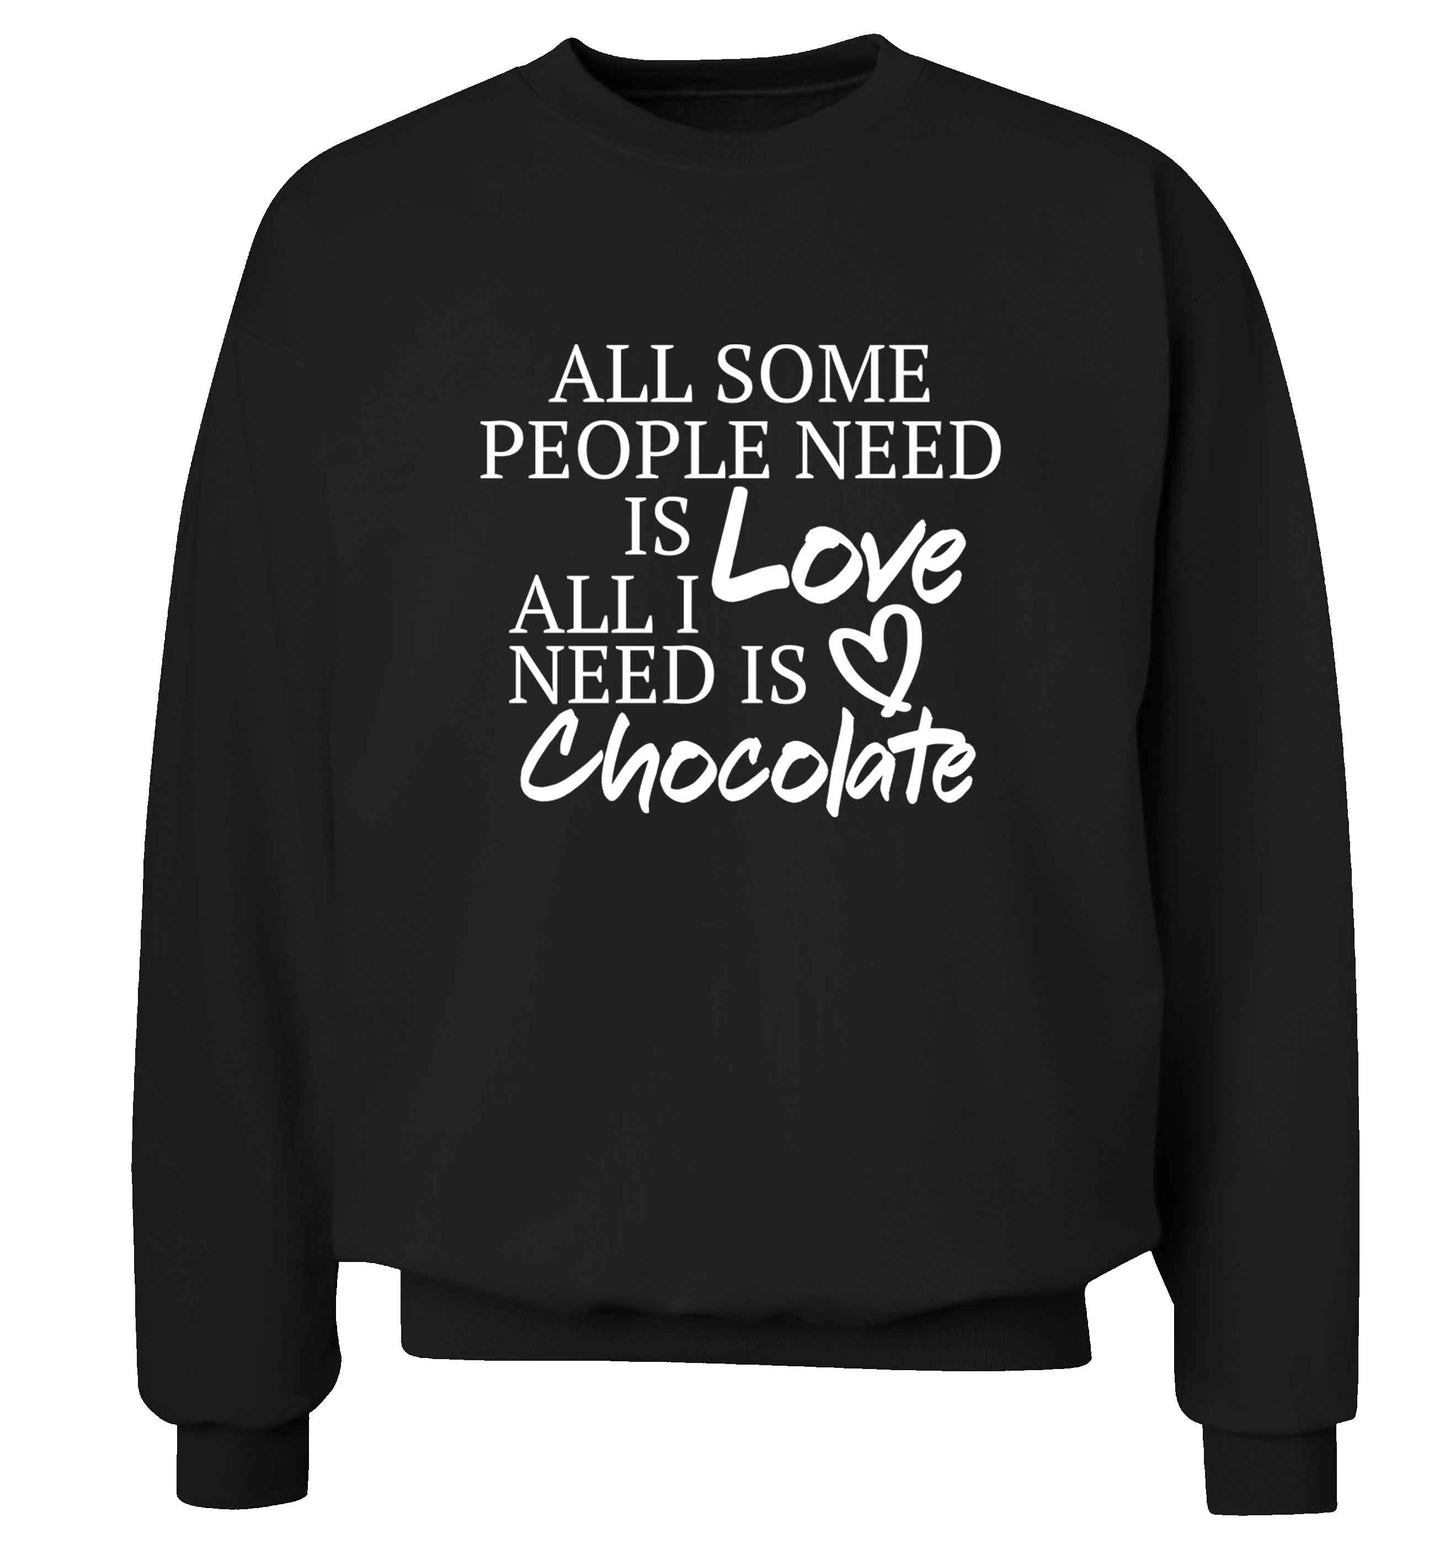 All some people need is love all I need is chocolate adult's unisex black sweater 2XL